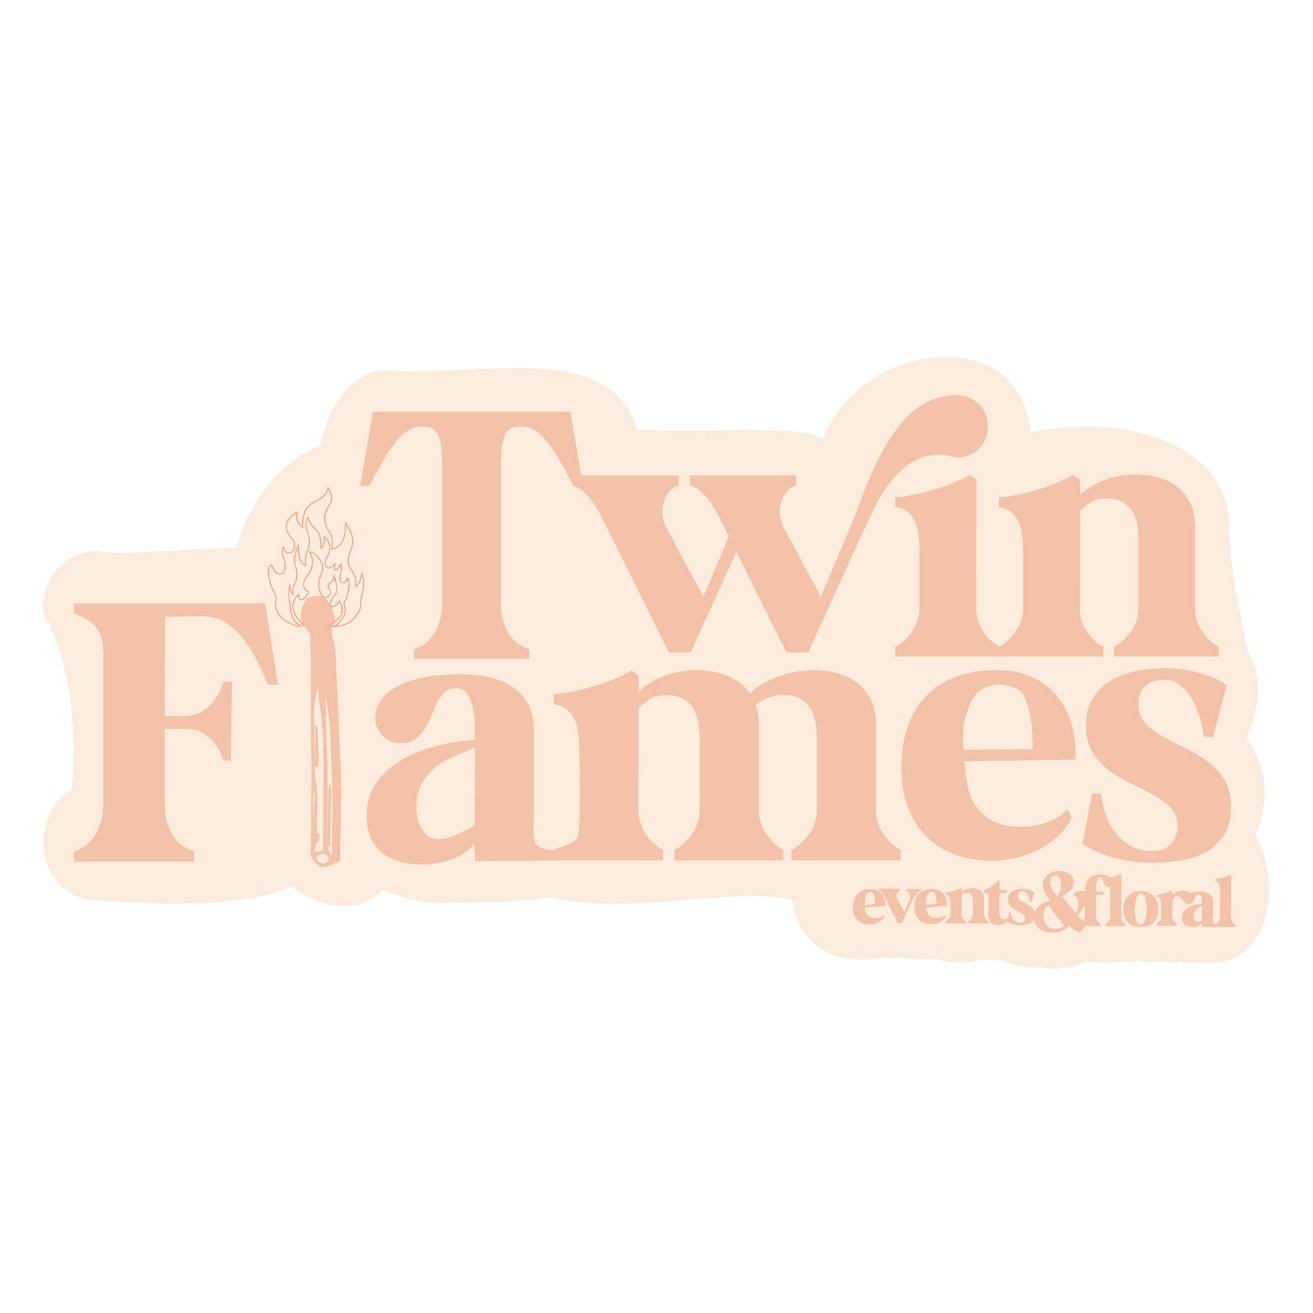 TWIN FLAMES EVENTS